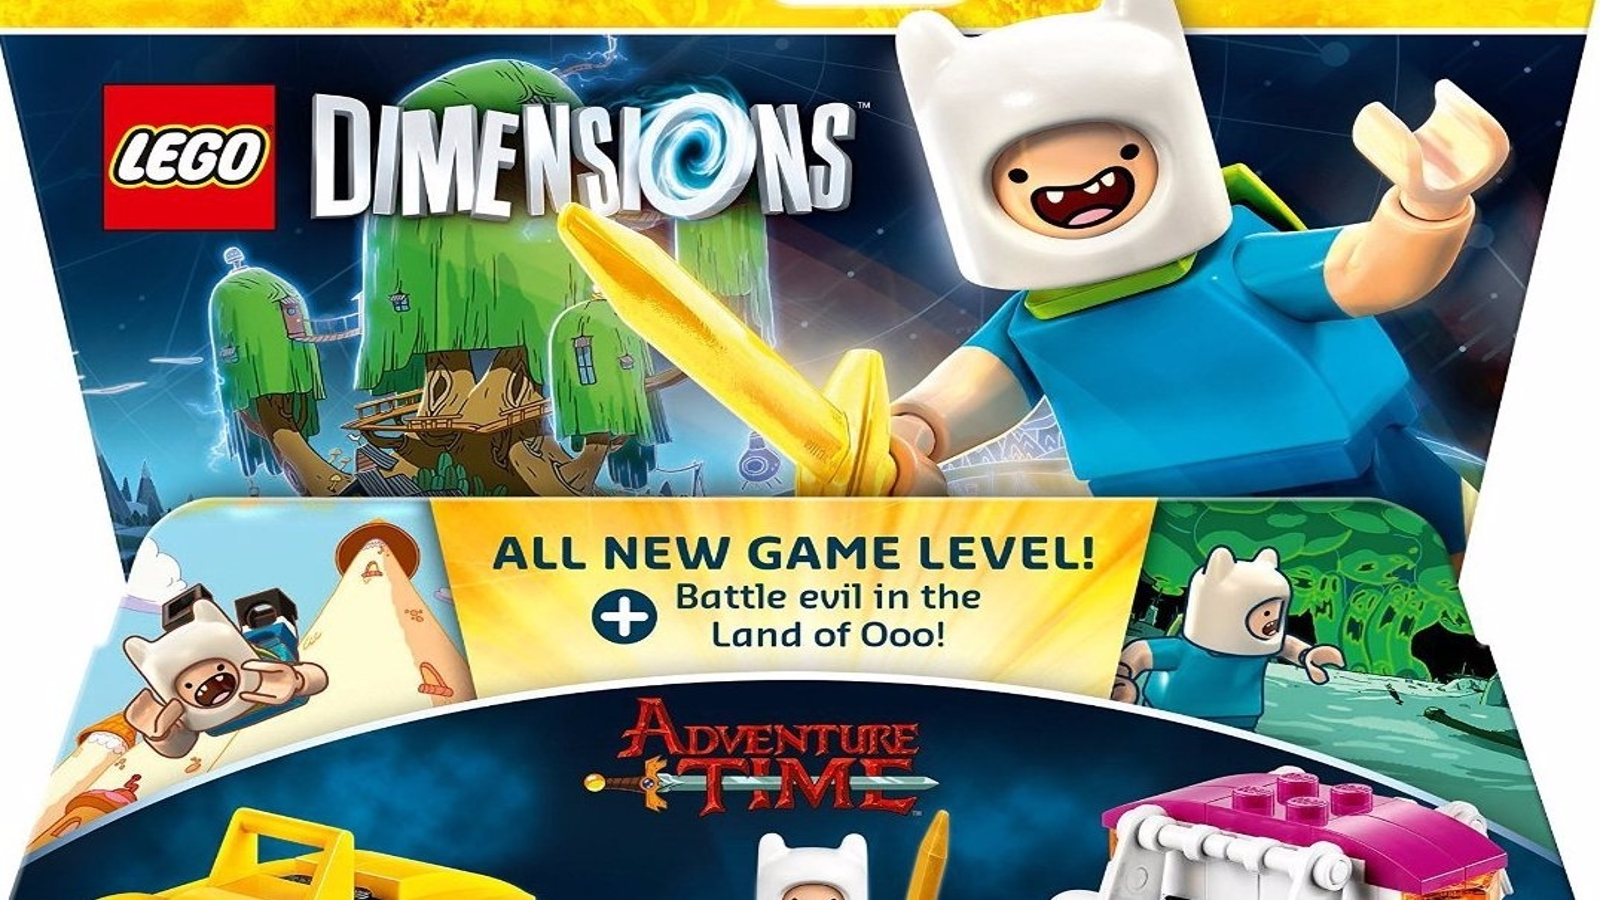 Harry Potter' and 'E.T.' Added to 'Lego Dimensions' Game – The